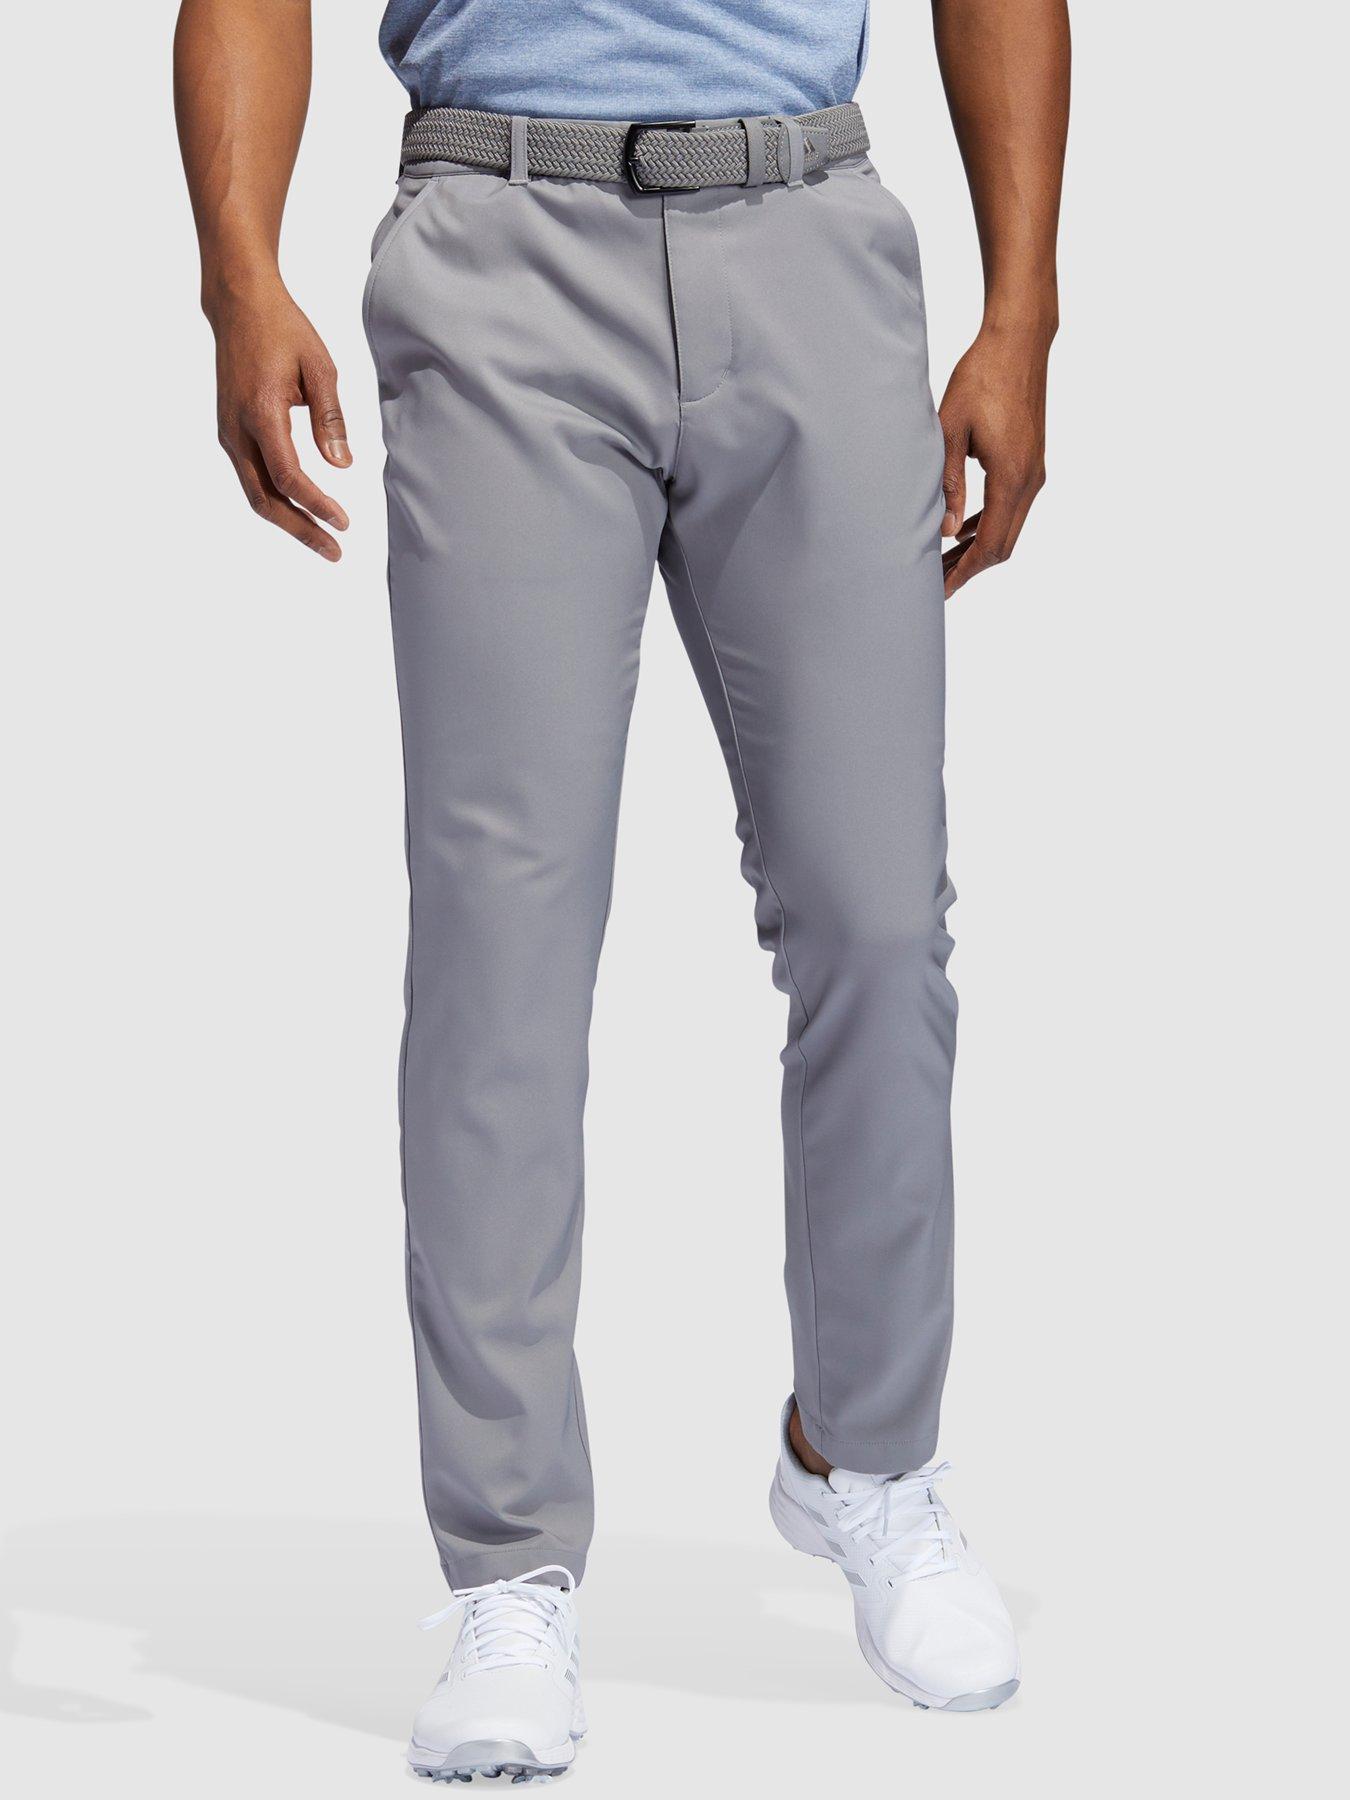 adidas Golf Ultimate365 Primegreen Tapered Pants - Grey | very.co.uk